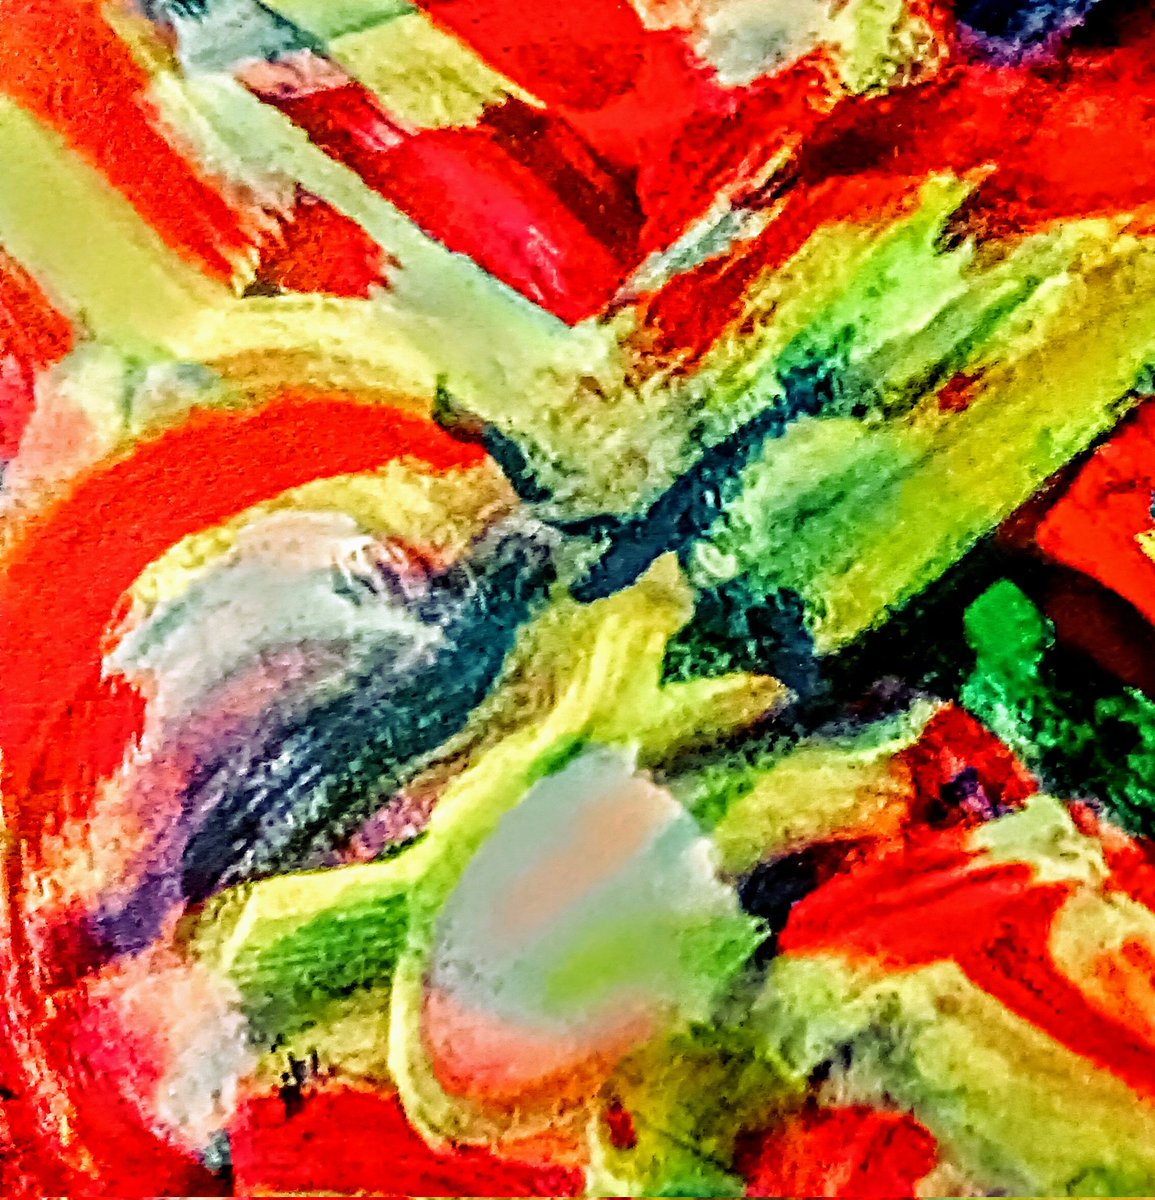 'On the wings of freedom, I will live and love for all of eternity!' #loveandpeace #abstractart #abstractartist #artistontwitter